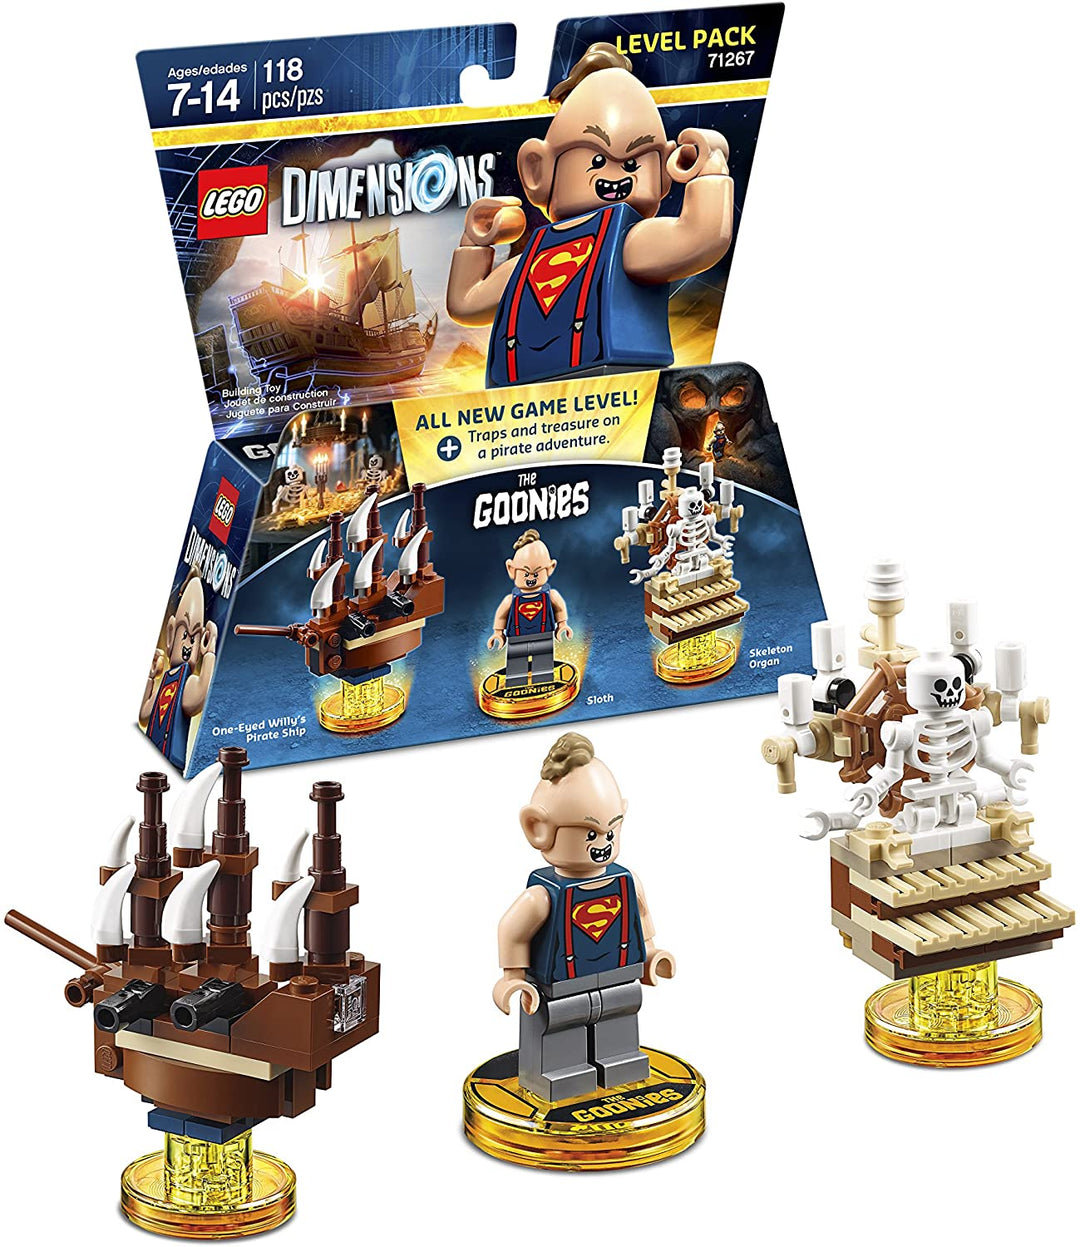 Lego Dimensions: Level Pack - Goonies